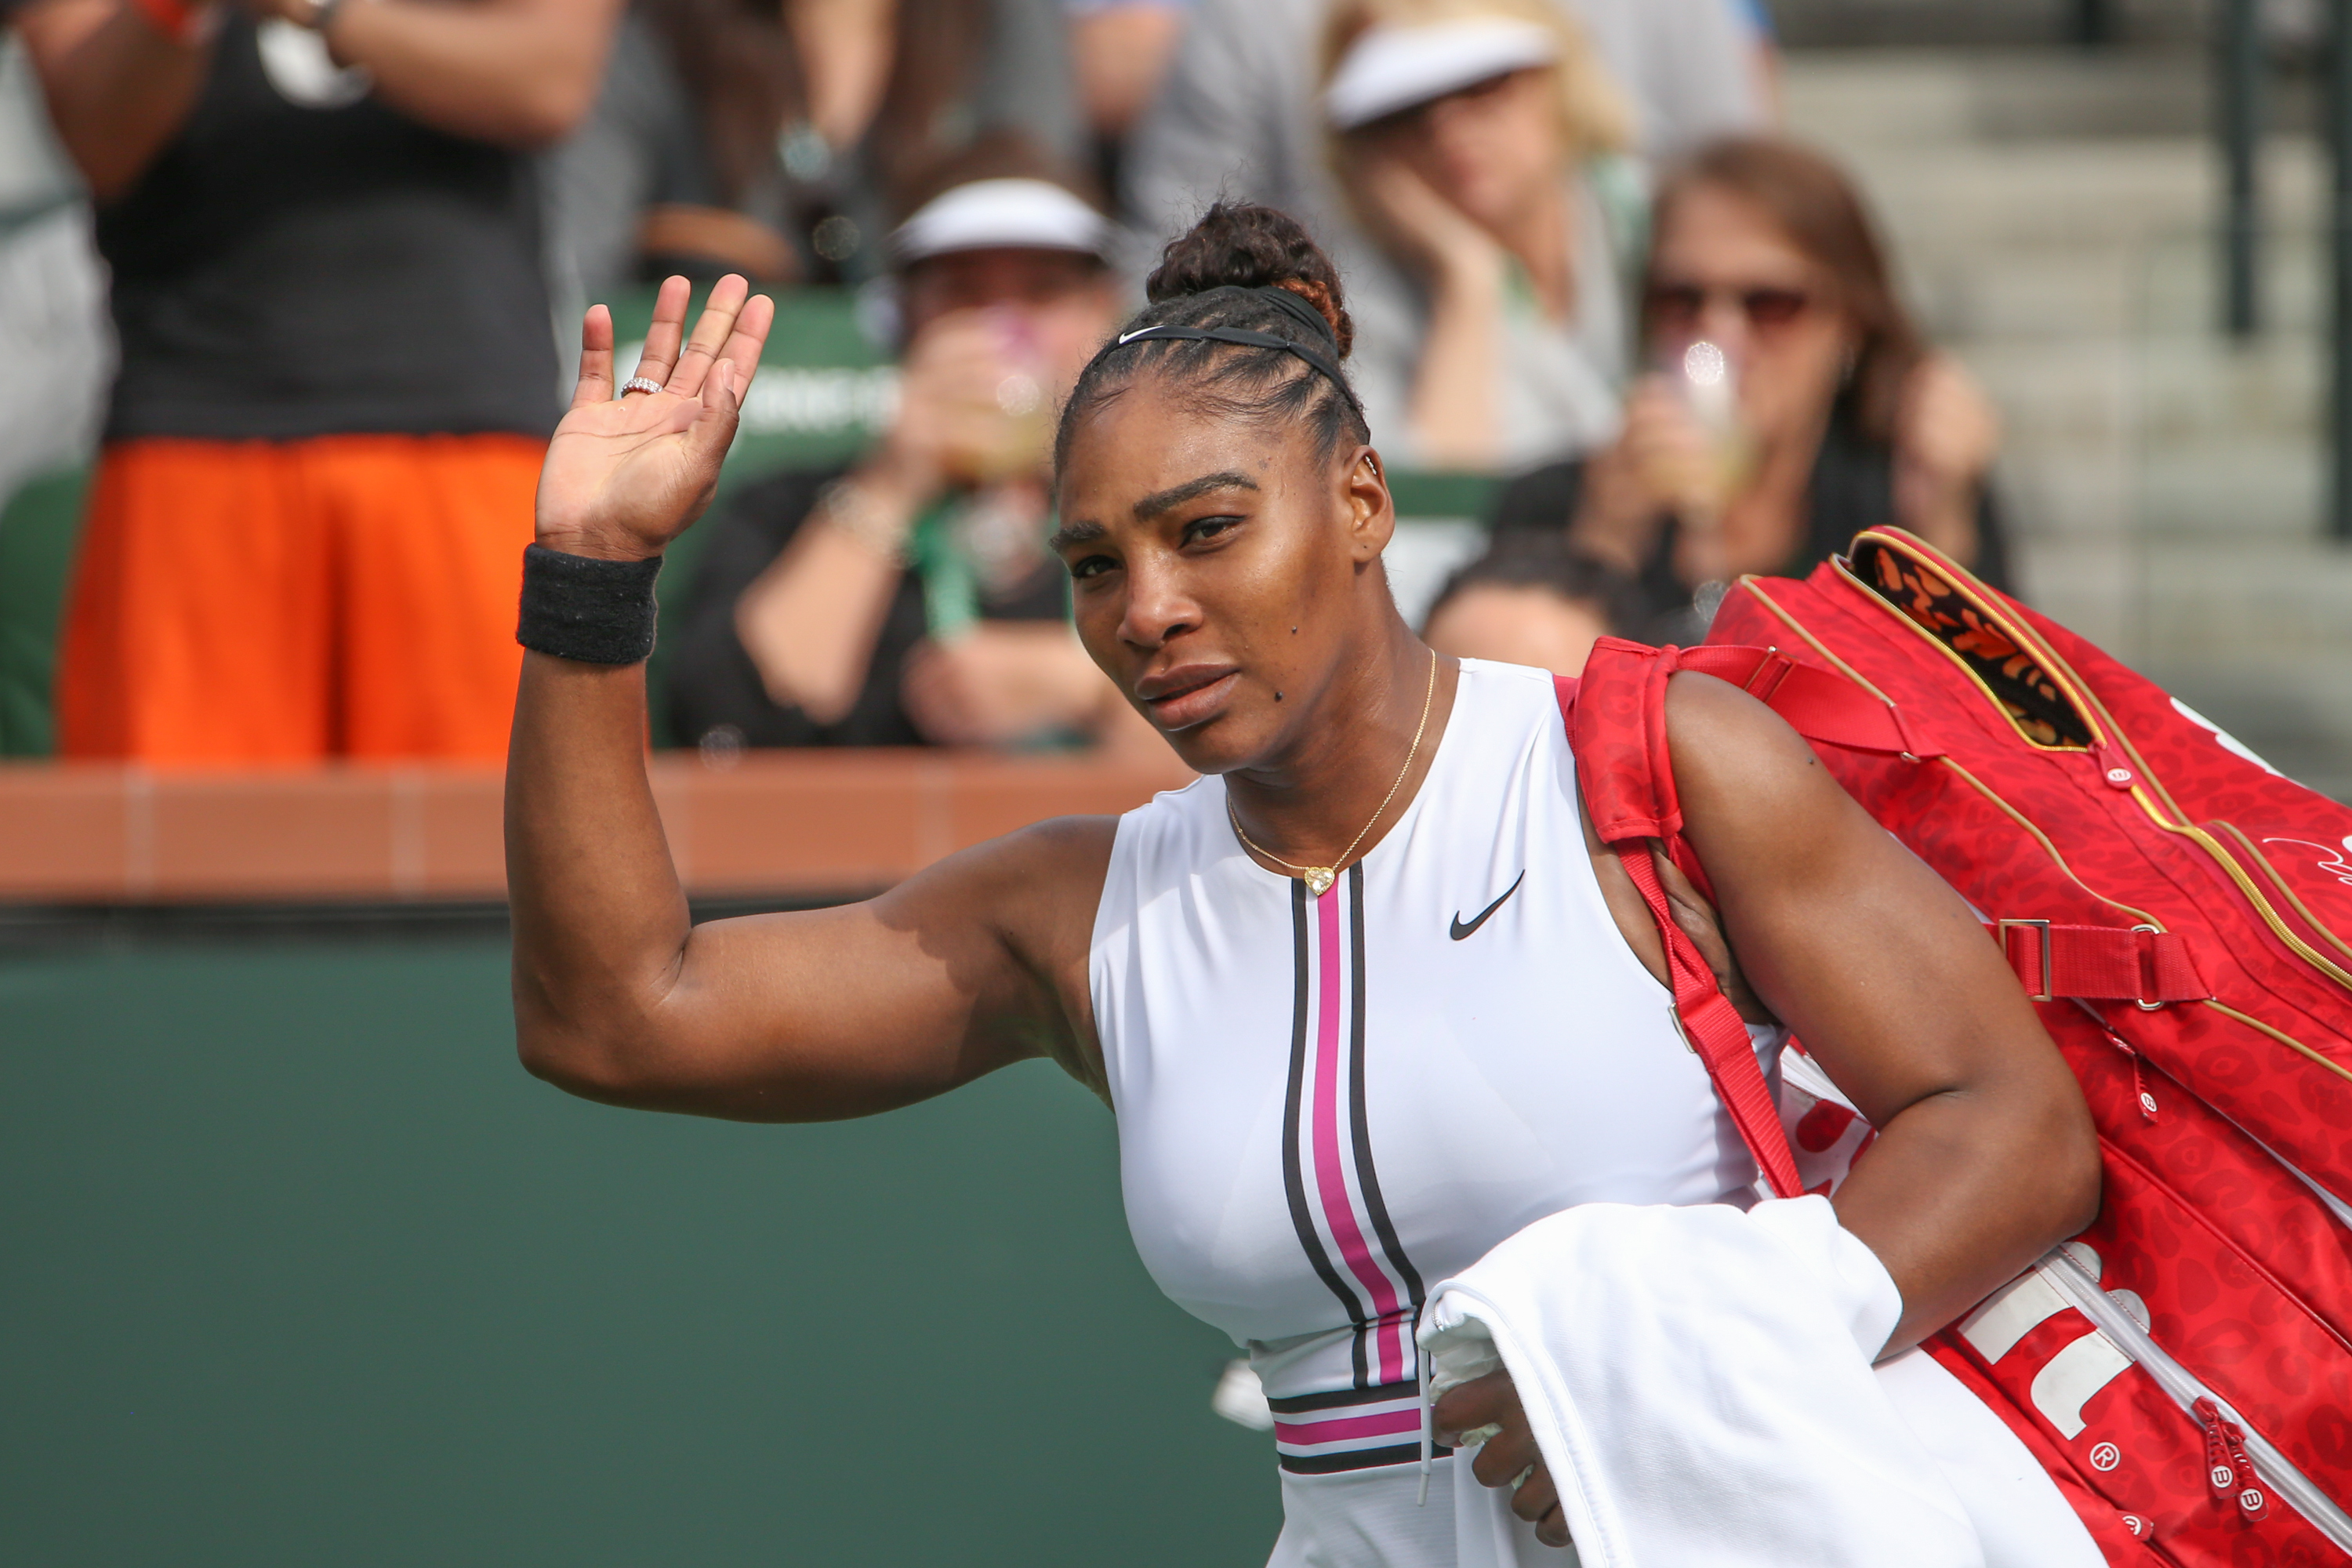 “I can’t breathe”: Serena Williams forced to retire after terrifying health scare